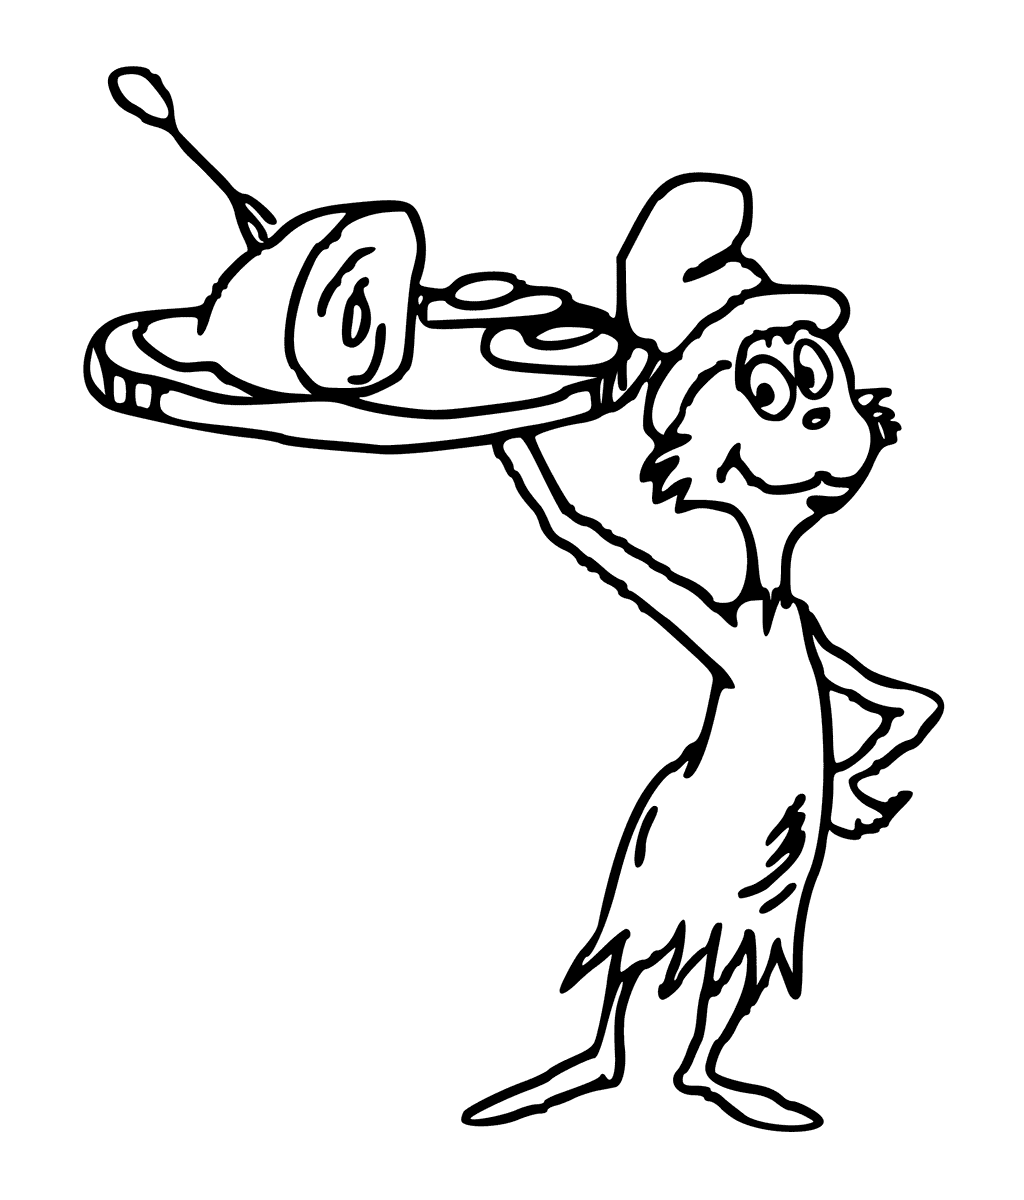 Green Eggs And Ham Coloring Pages Coloringpages